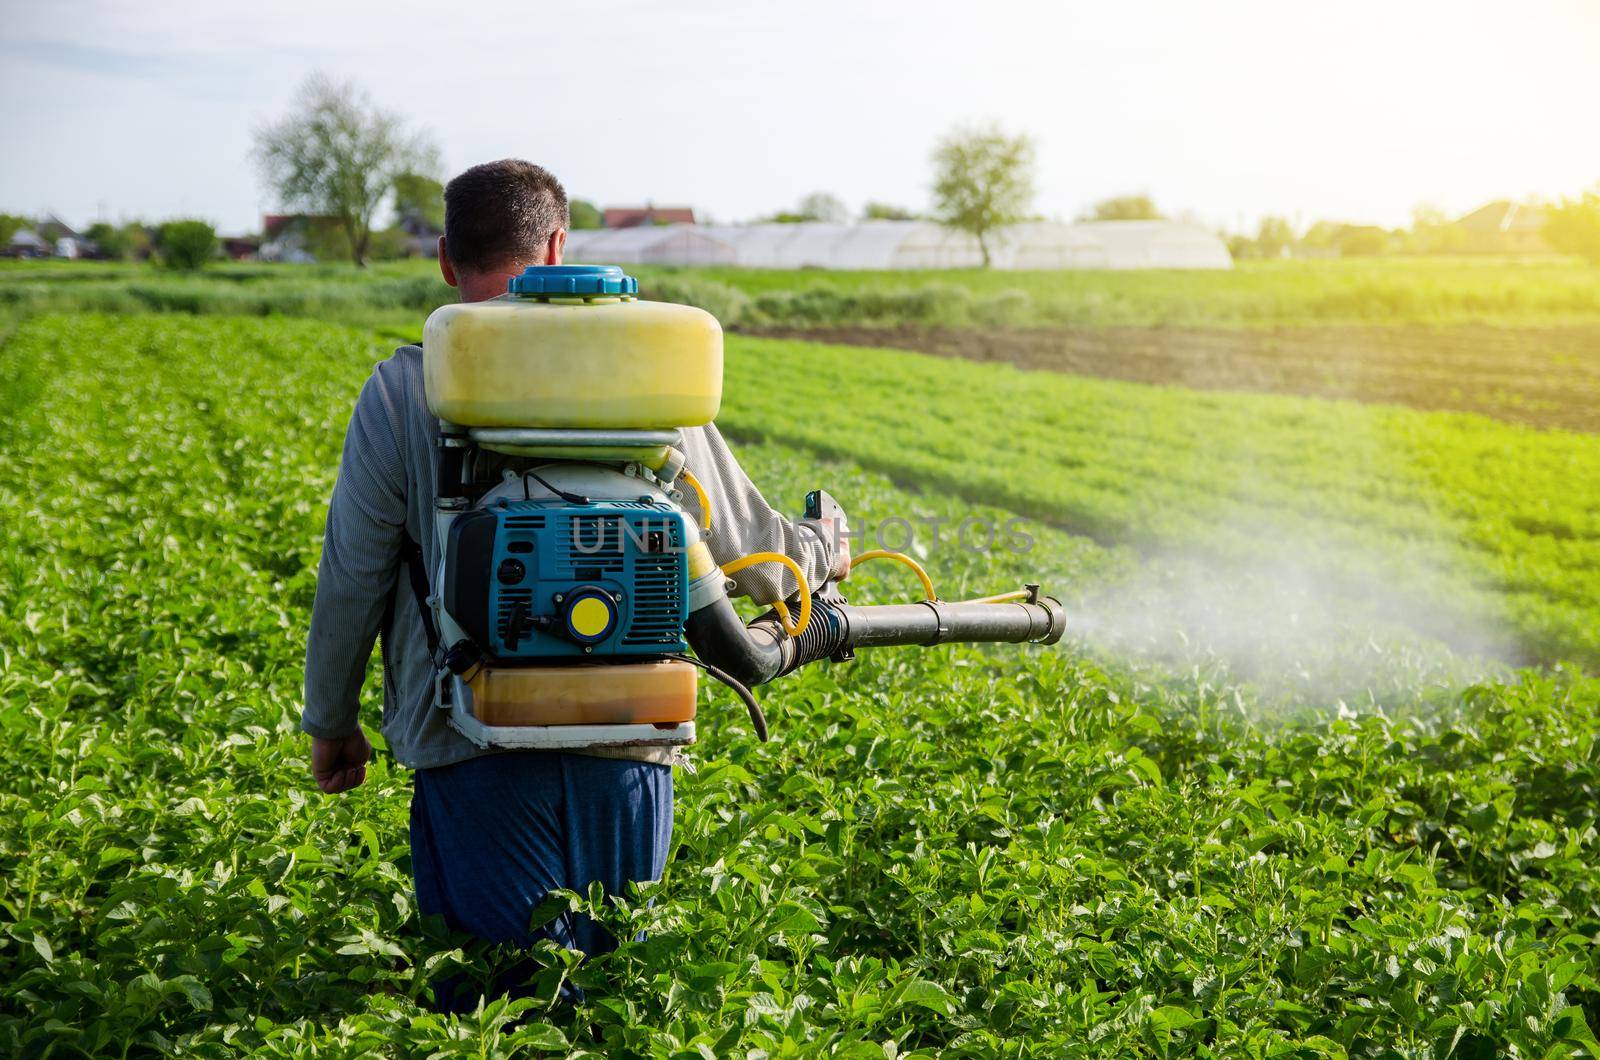 A farmer with a mist fogger sprayer sprays fungicide and pesticide on potato bushes. Effective crop protection, environmental impact. Protection of cultivated plants from insects and fungal infections by iLixe48